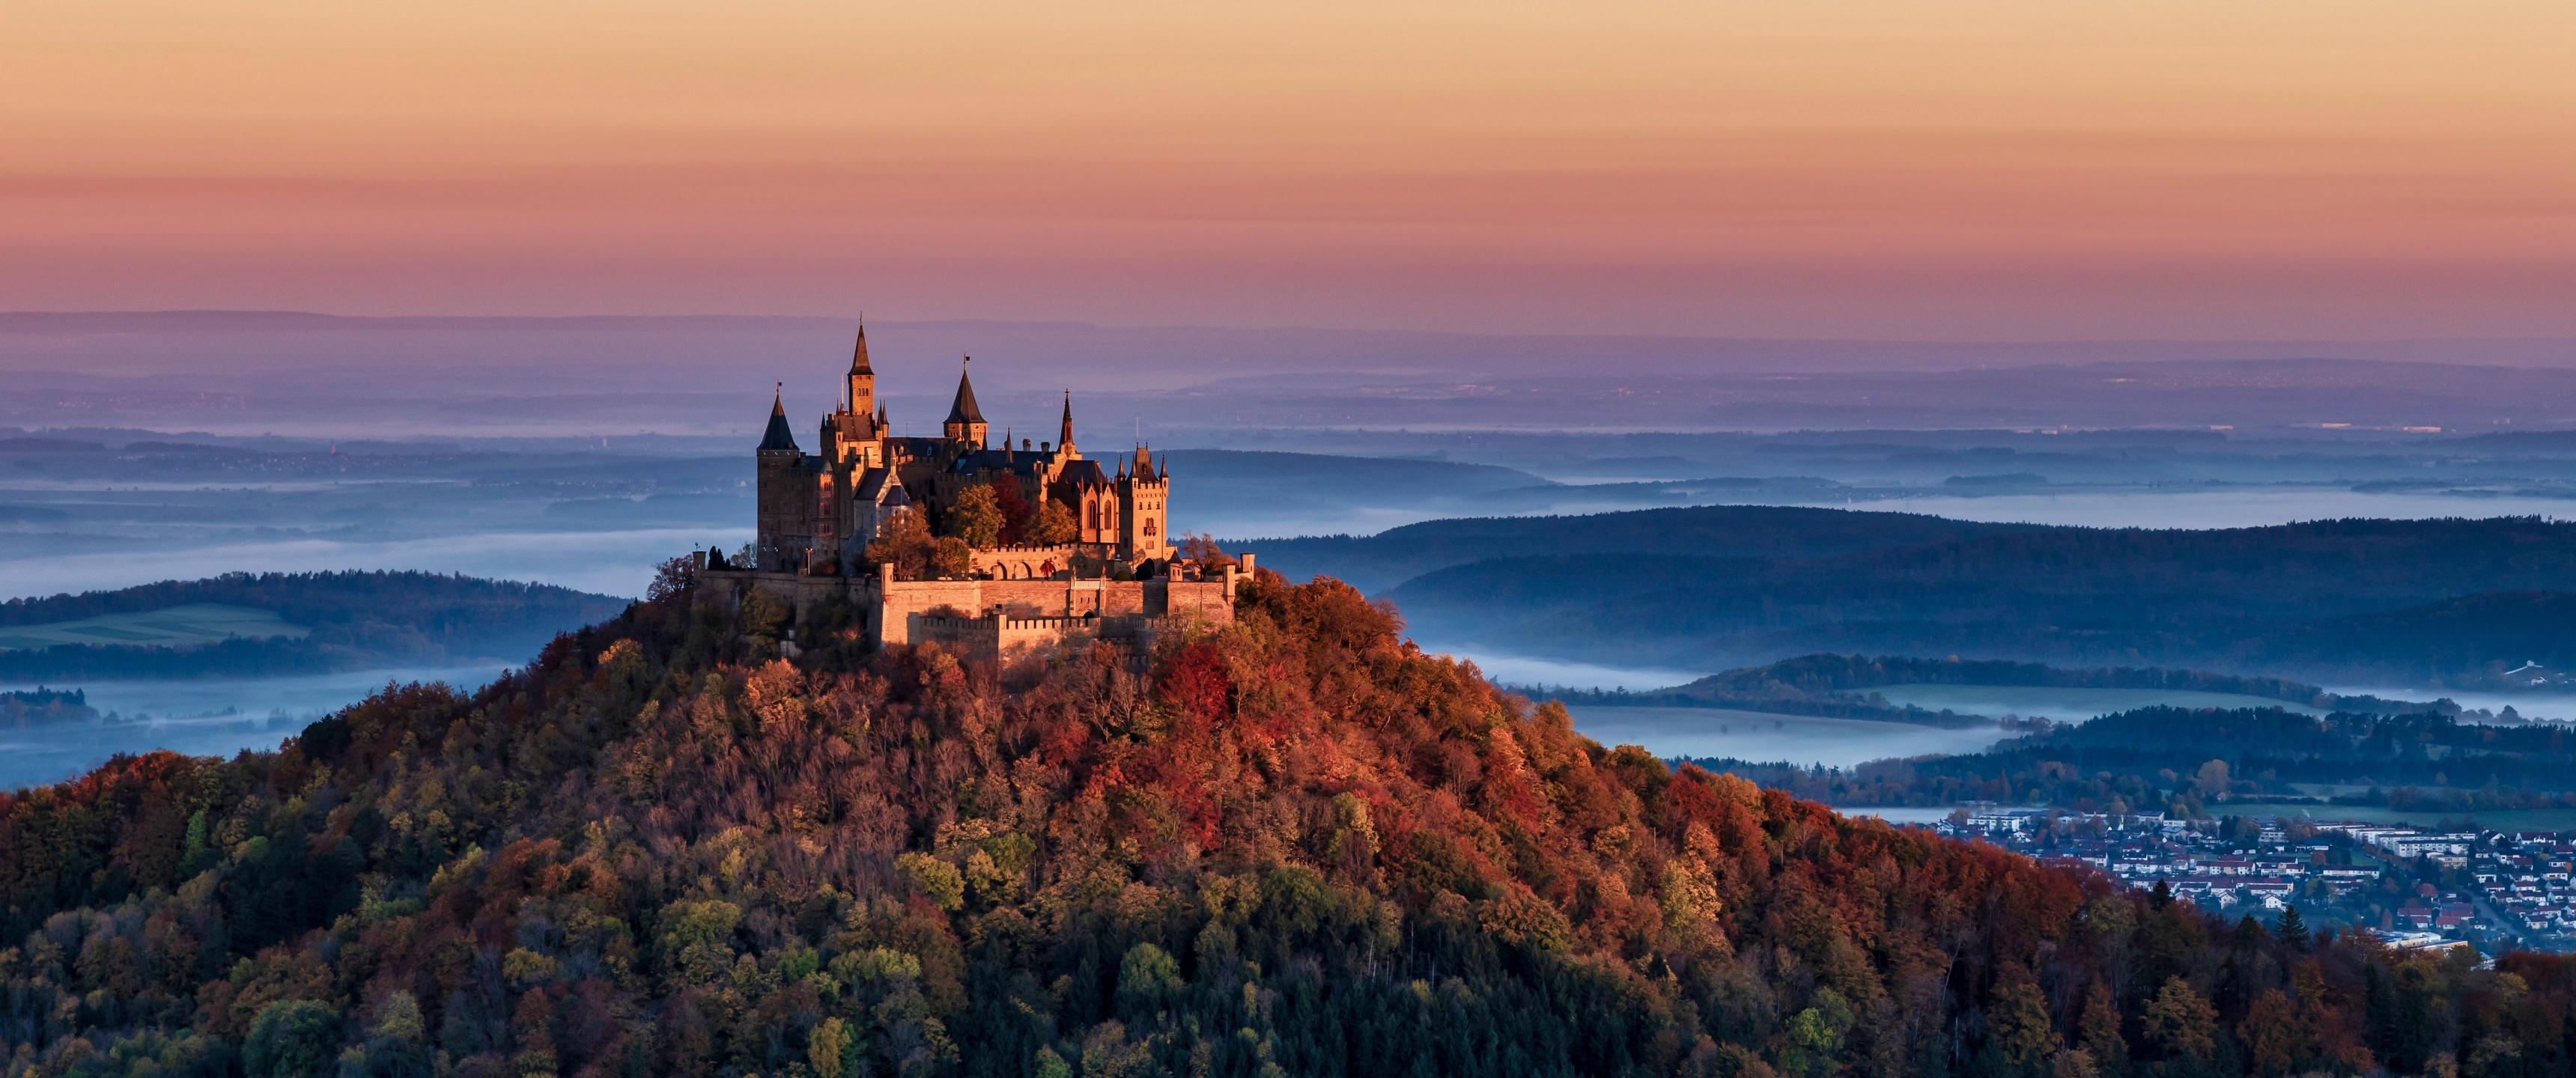 Castle: Hohenzollern, A prominent historical monument, The seat of the Brandenburg-Prussian rulers. 3440x1440 Dual Screen Wallpaper.